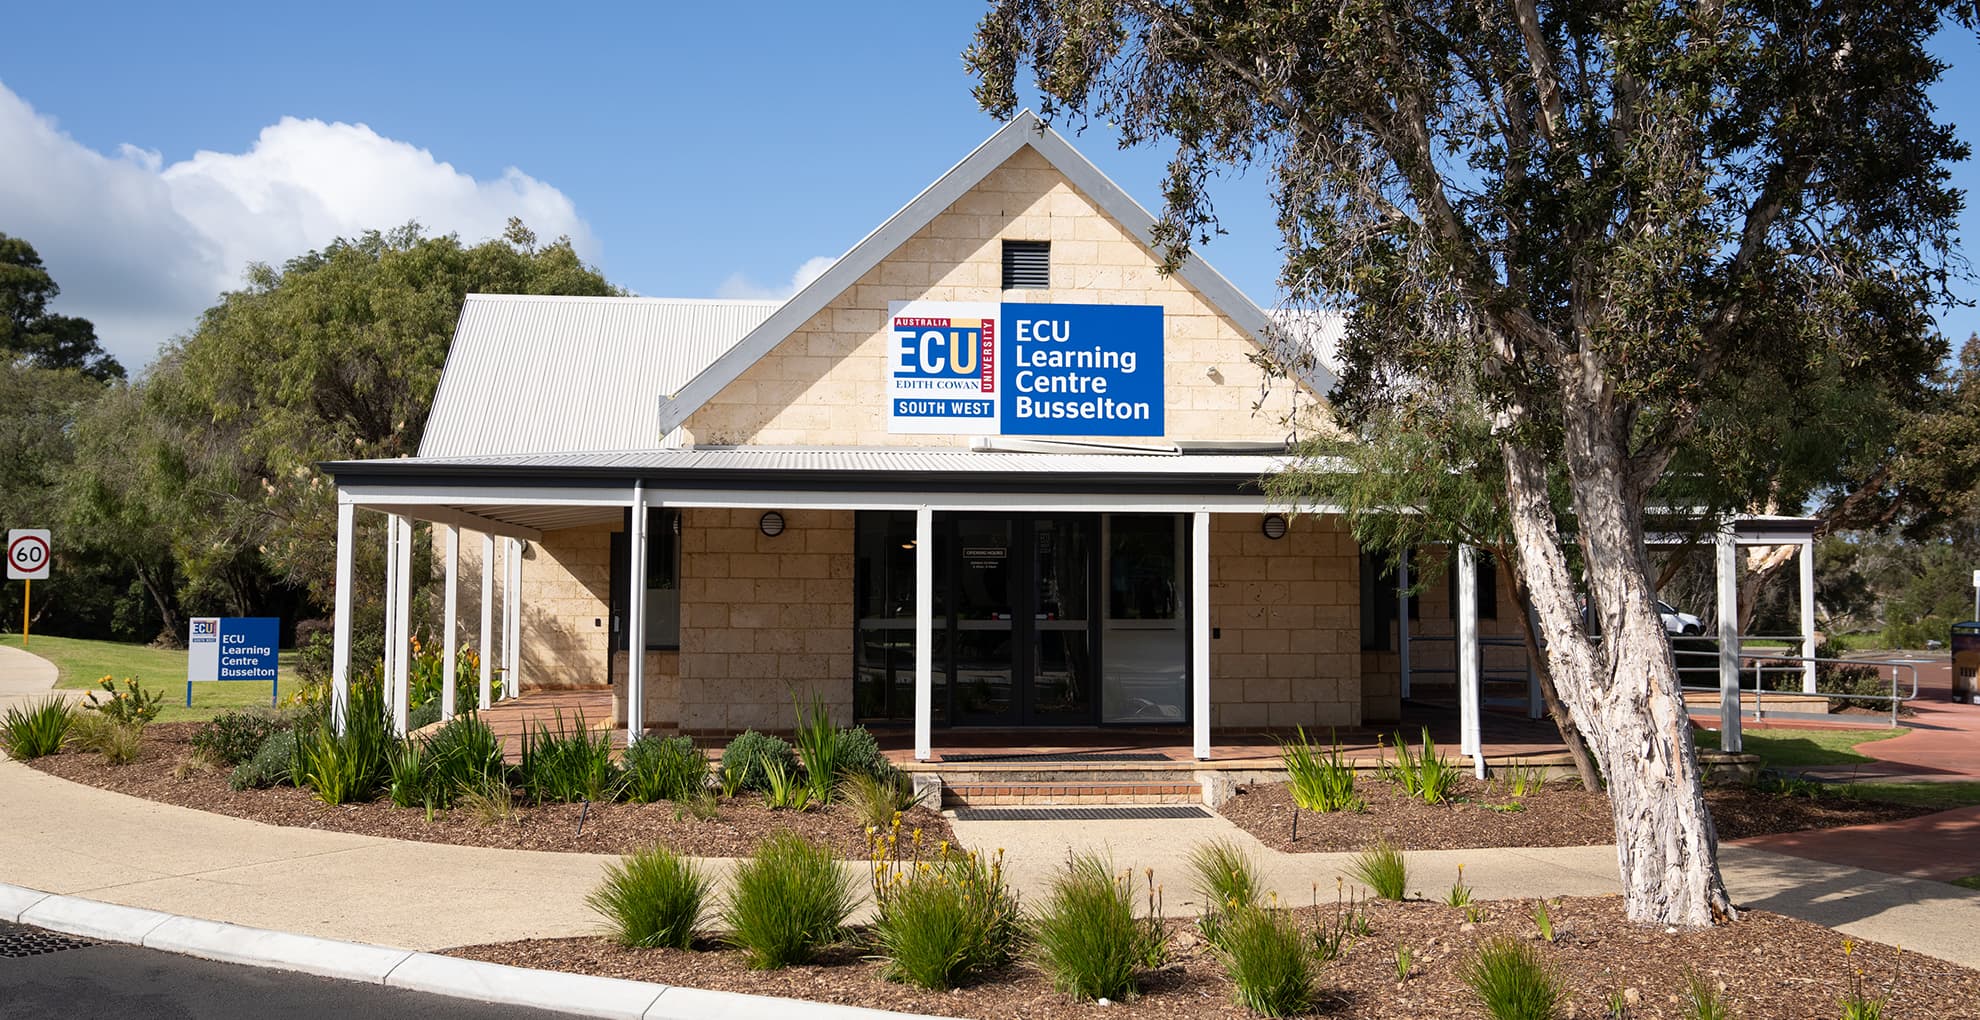 Exterior shot of ECU Learning centre in Busselton.